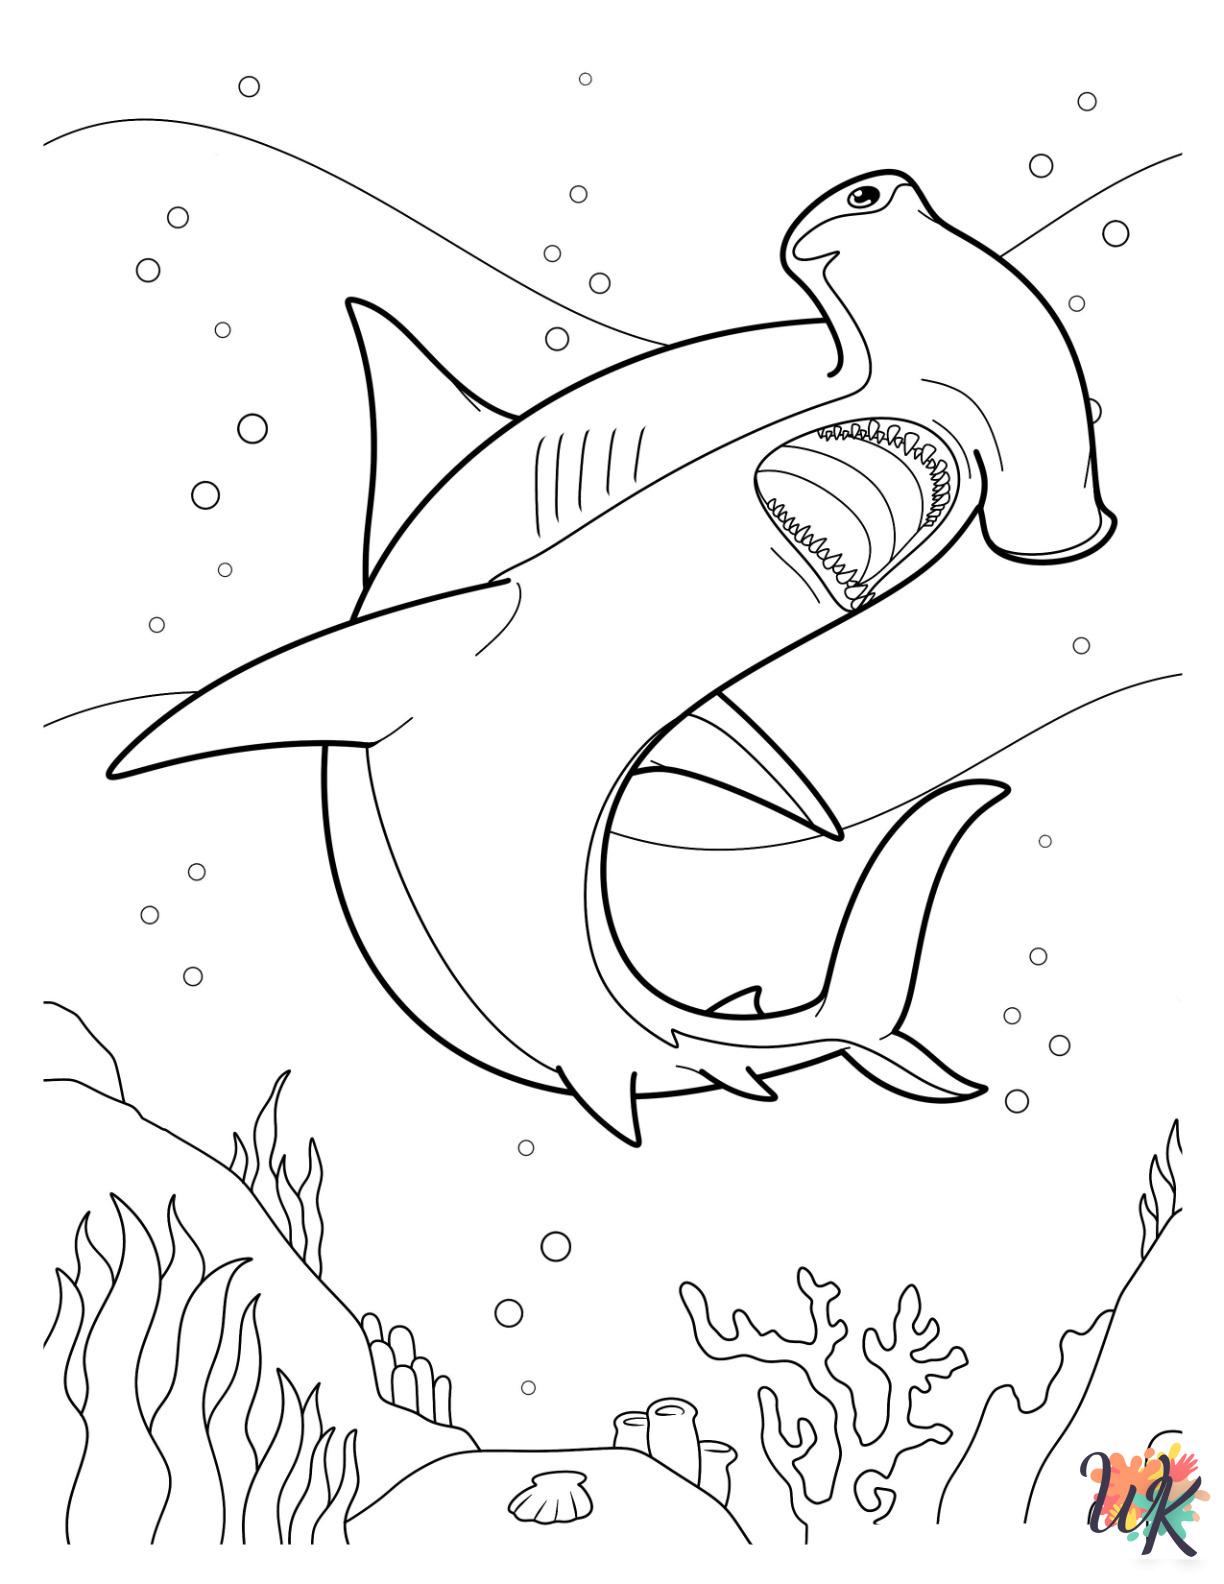 Hammerhead Shark adult coloring pages